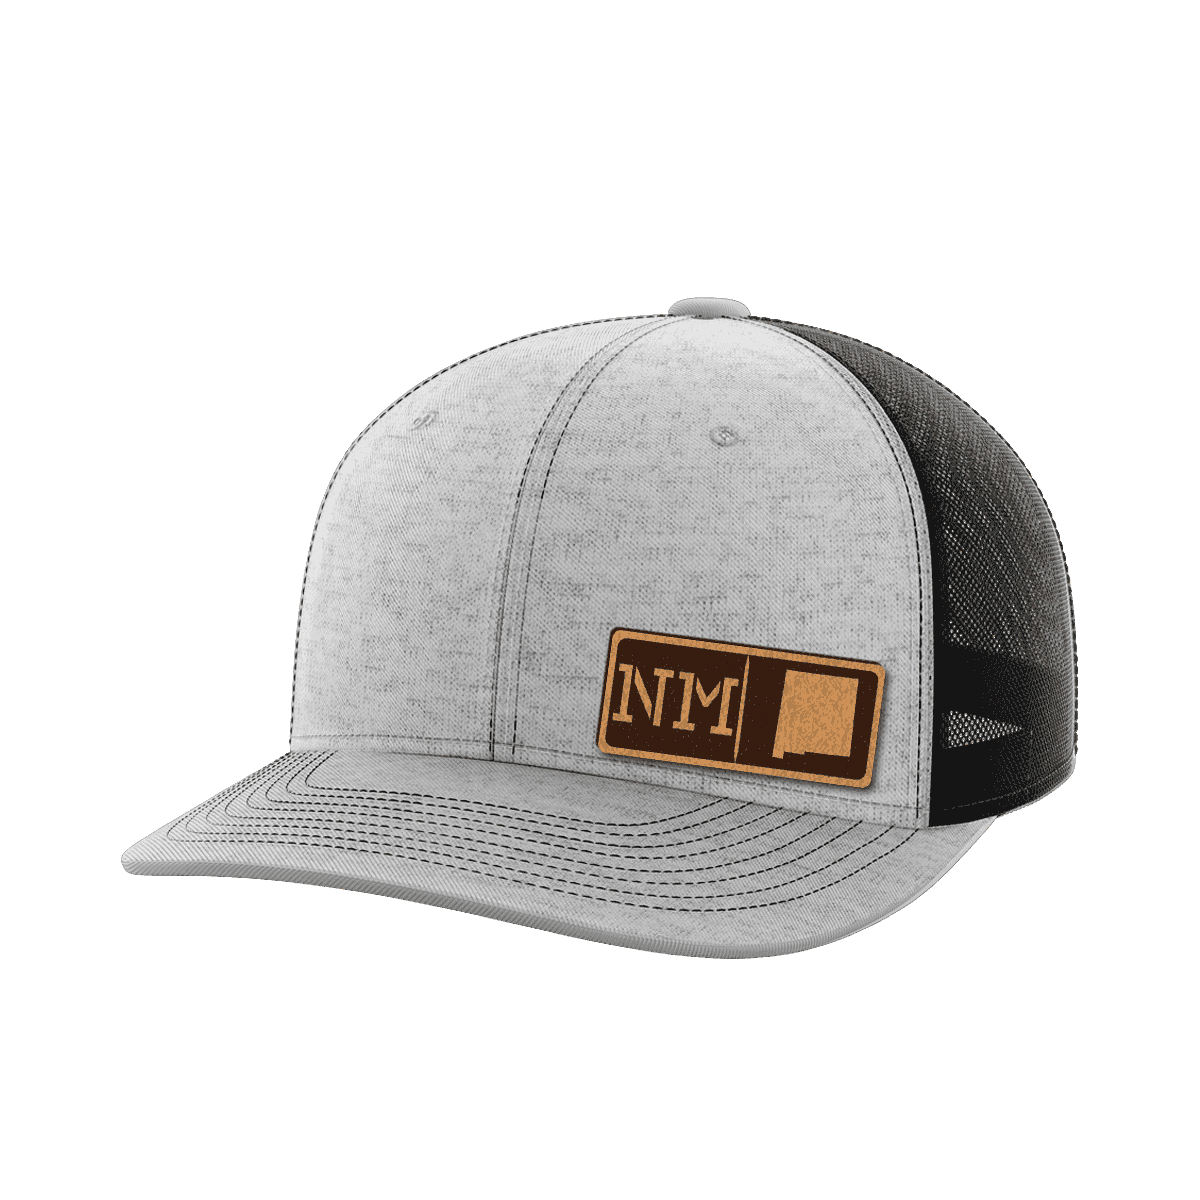 New Mexico Homegrown Hats - Greater Half